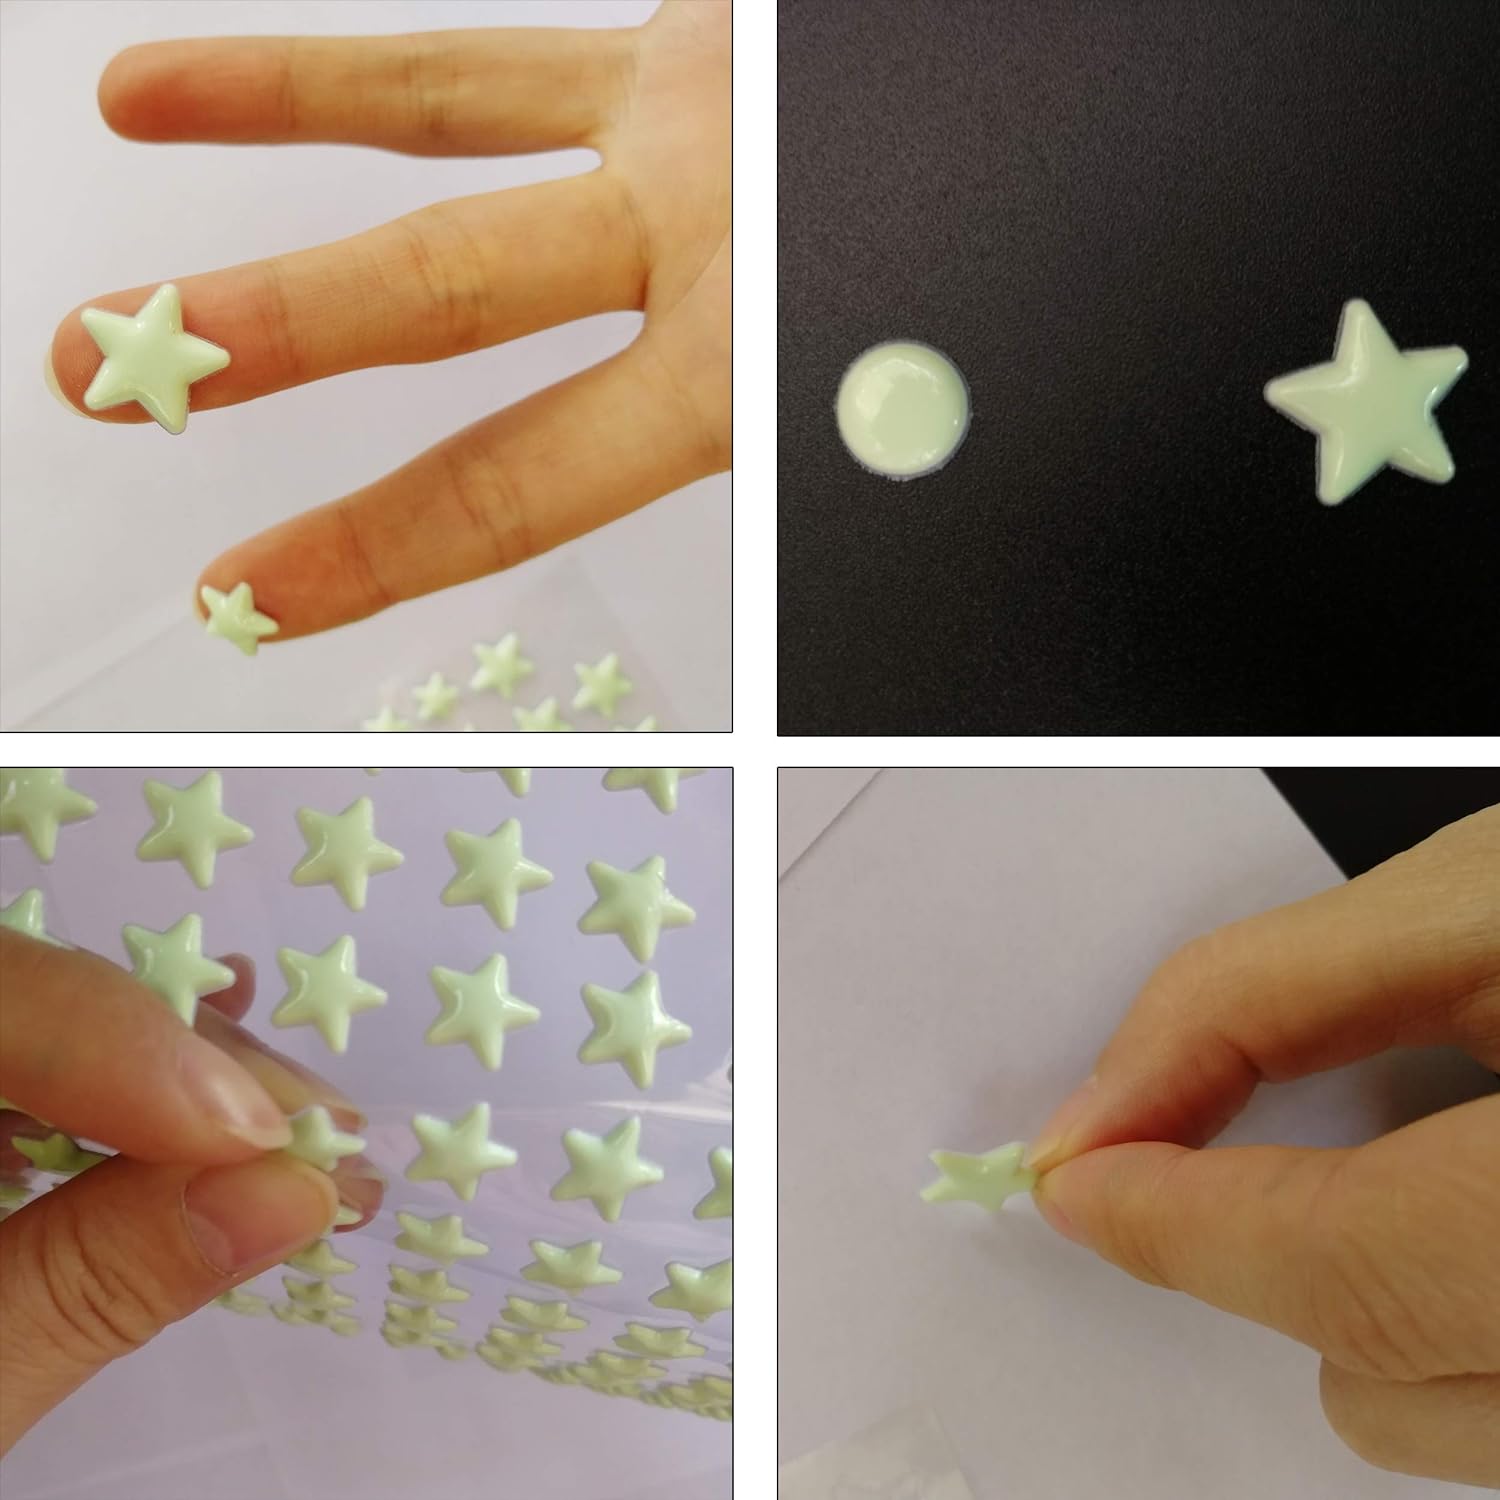 thinkstar 1230 Pcs Ultra Glow In The Dark Stars Wall Stickers, 3D Adhesive Dots Decor Starry Sky Decor For Kids Bedroom Or Birthday …